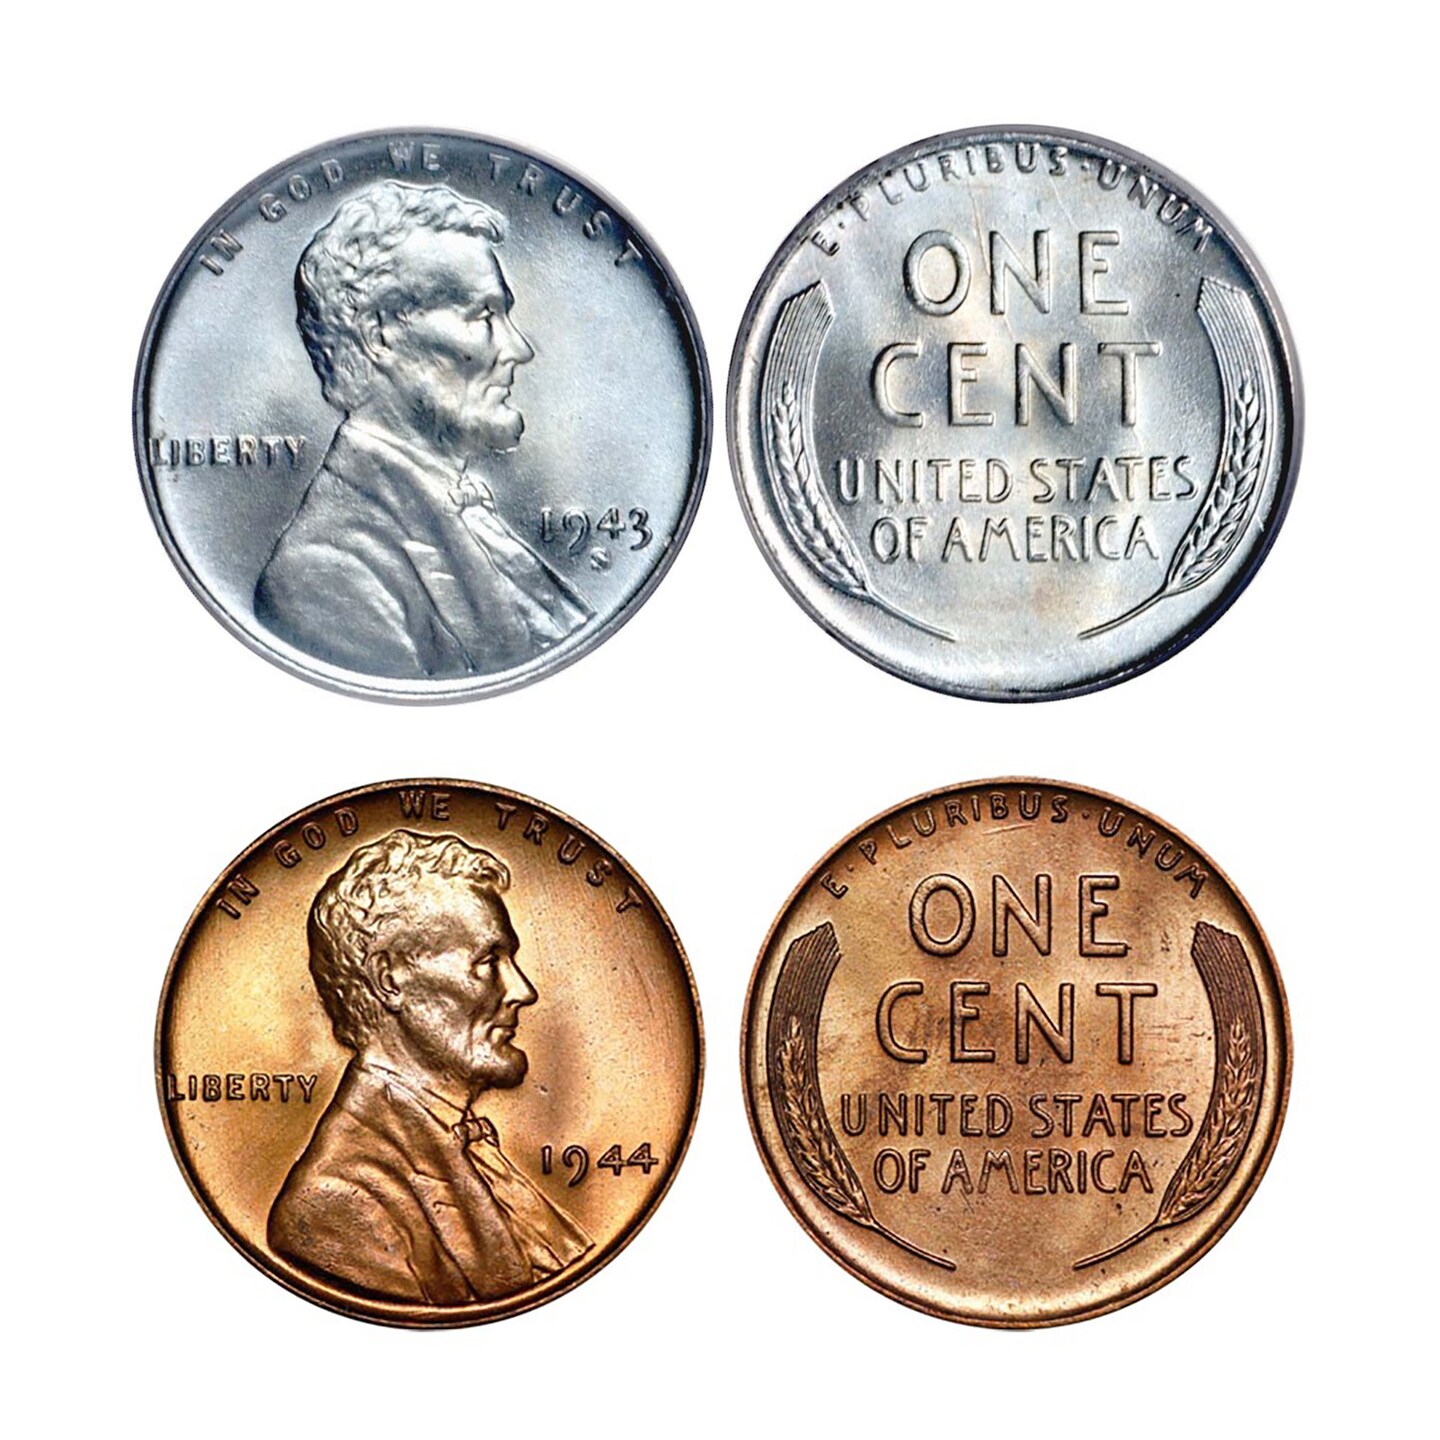 The Last 25 Years of Lincoln Wheat Penny Collection (1934-1958)